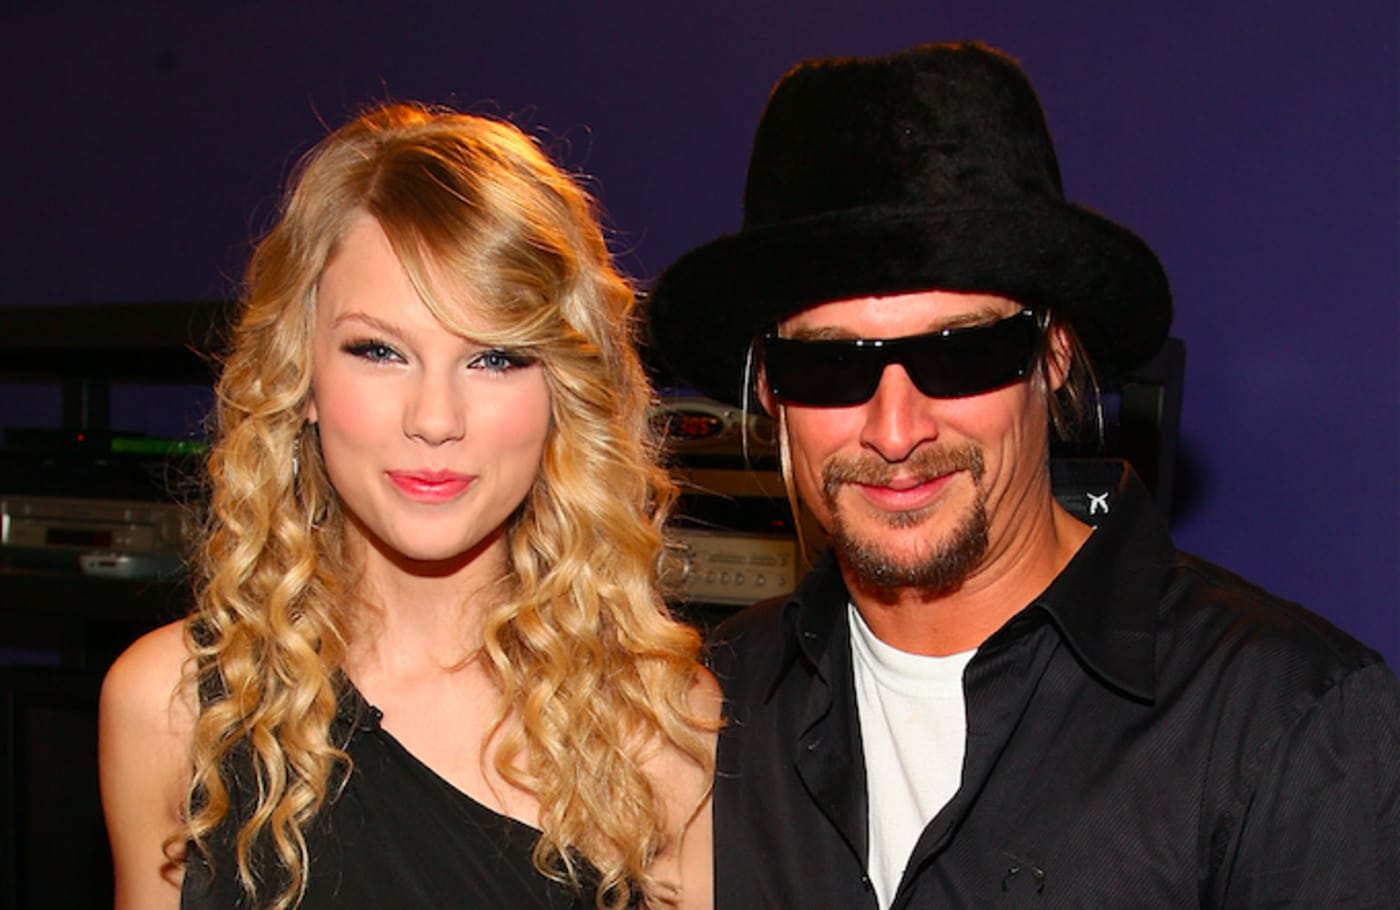 Taylor Swift and Kid Rock